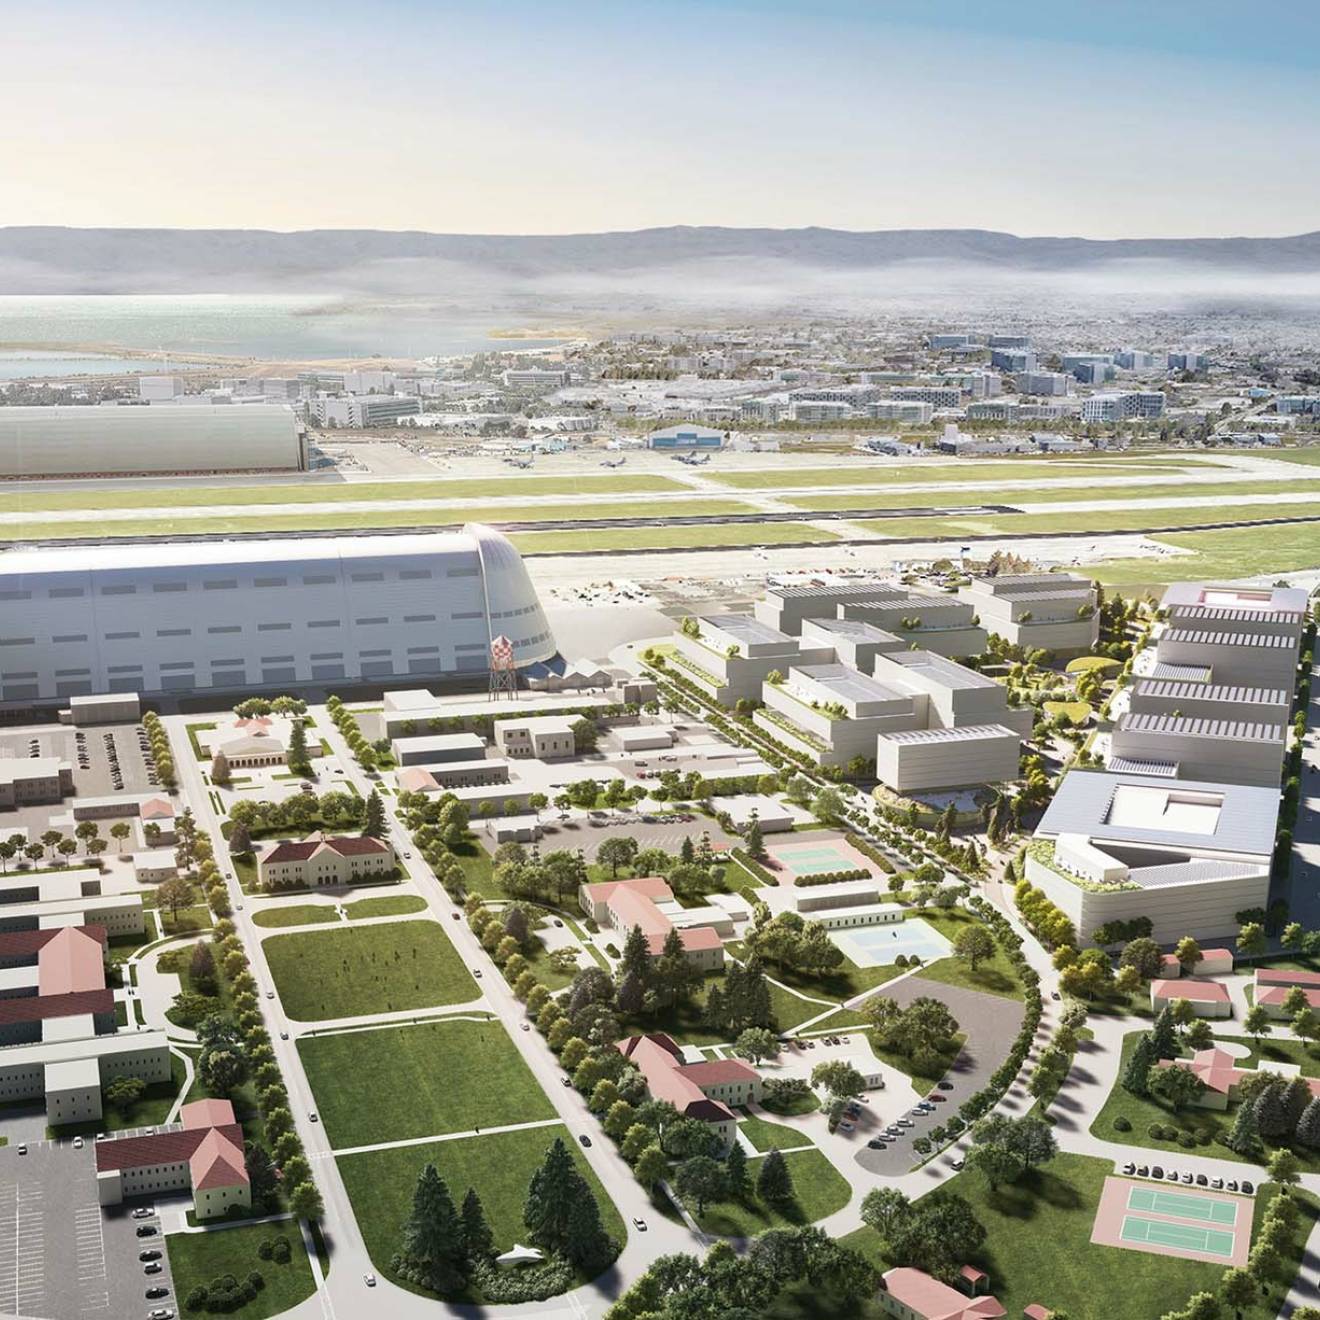 Artist rendering of an office campus with the bay in the background